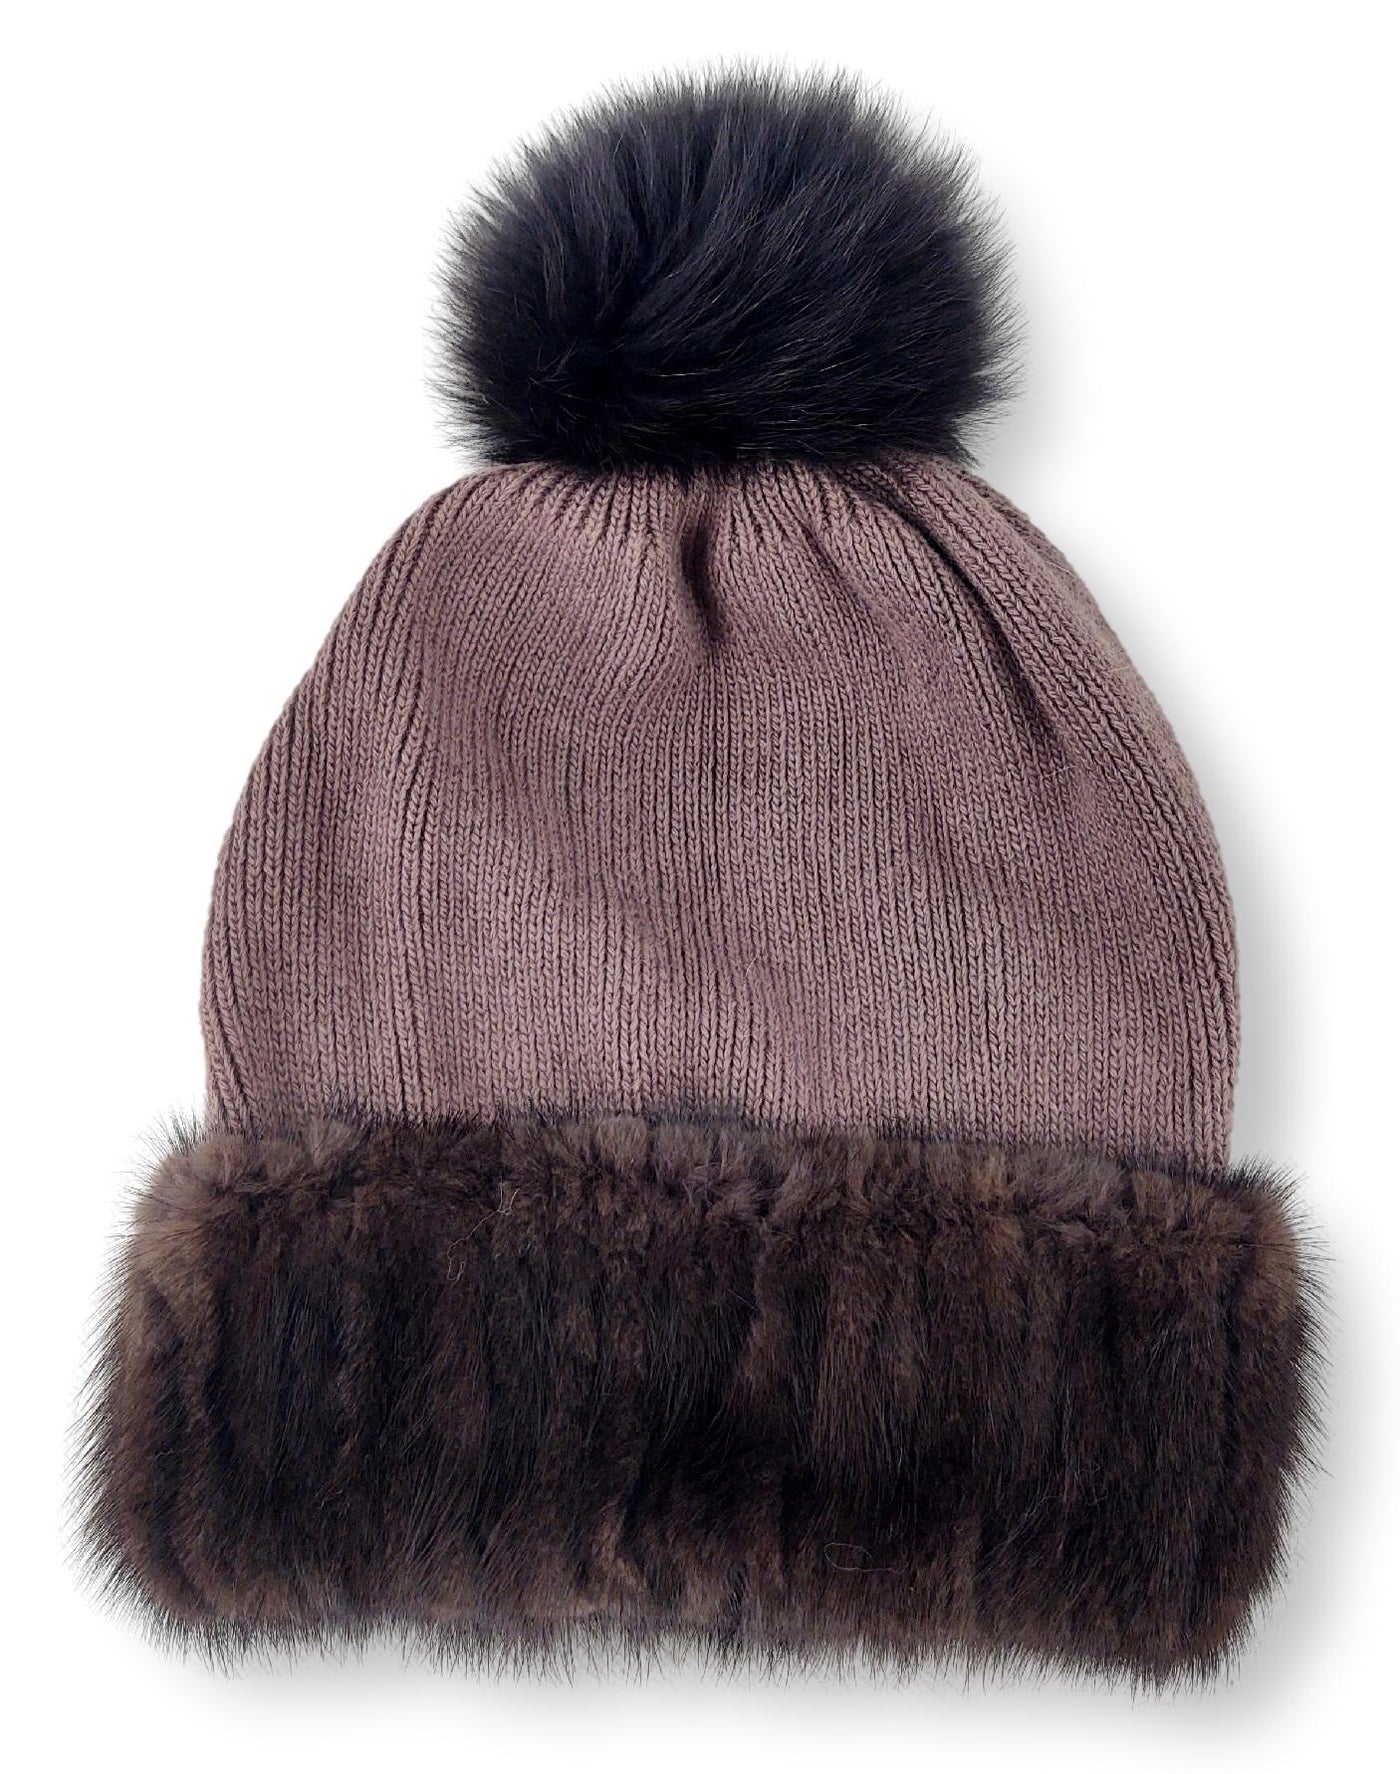 Knitted Hat - Textile - Accesories - Brown